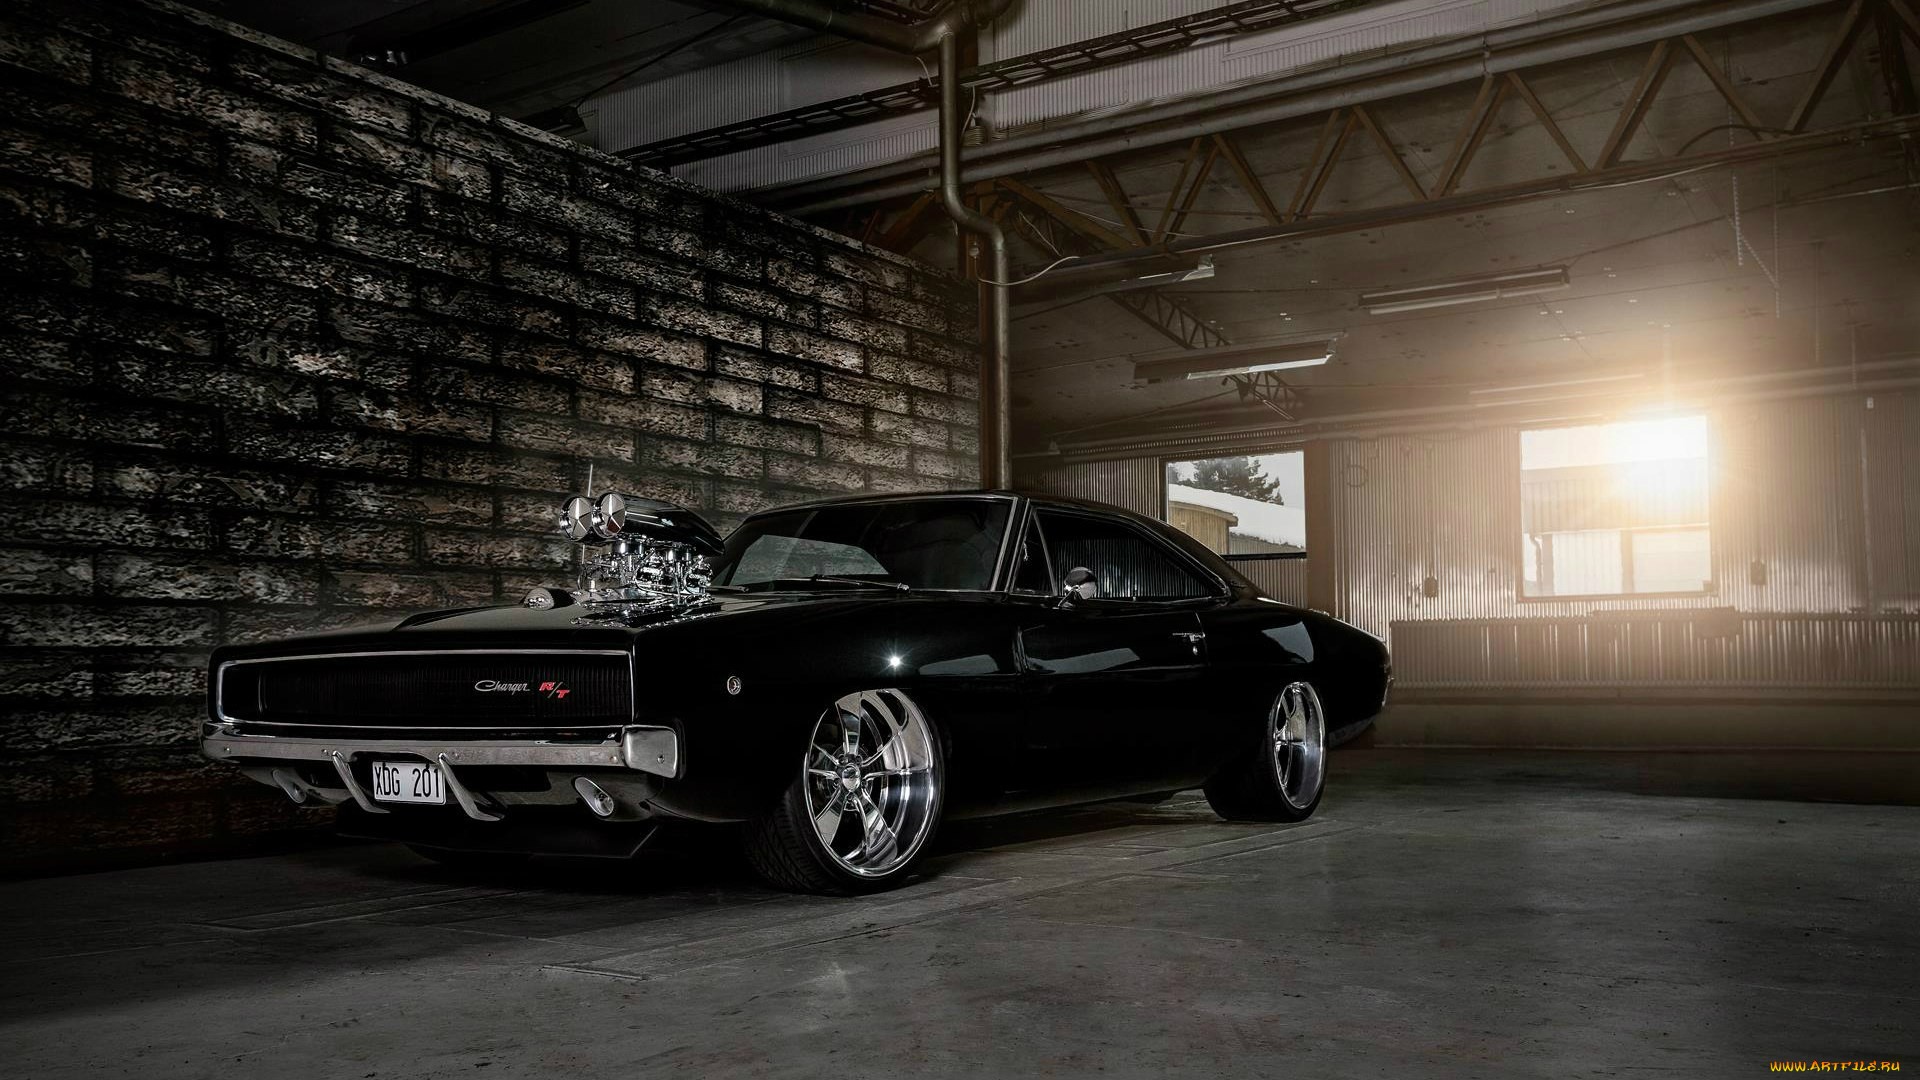 Fast Furious Charger Images Pictures   Becuo